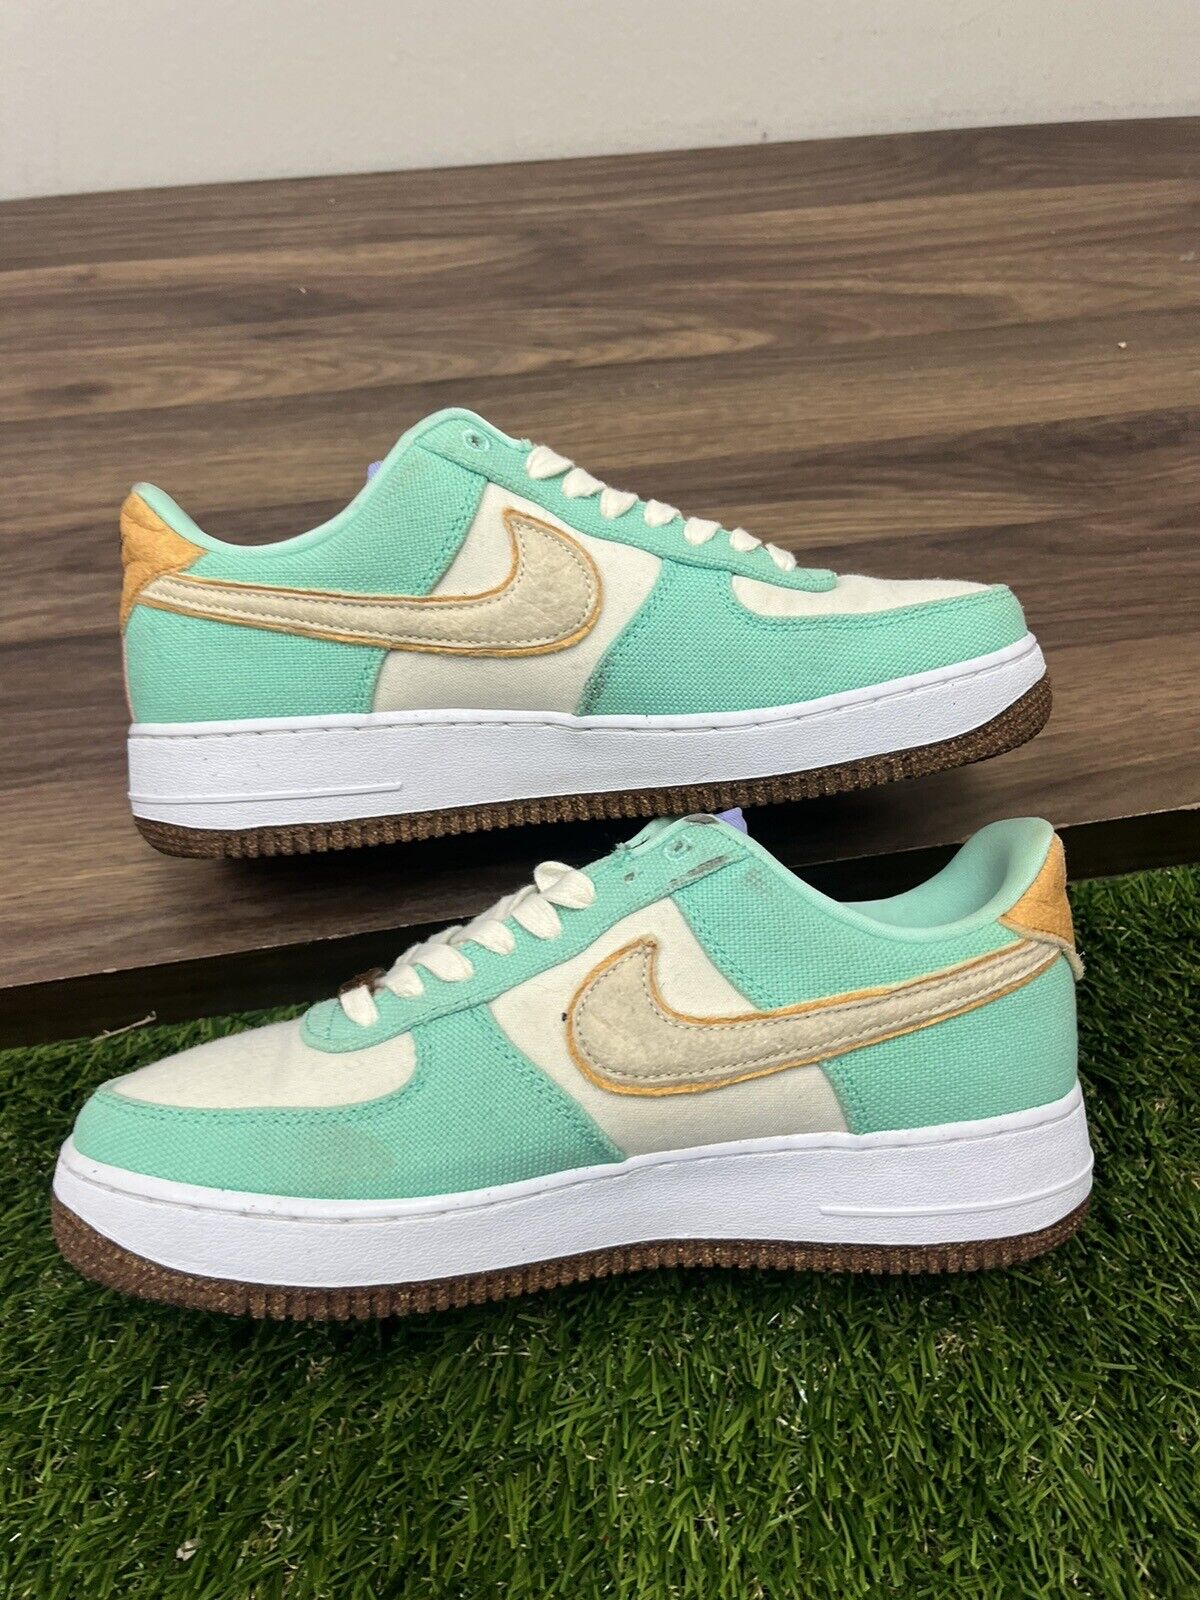 NIKE AIR FORCE 1 ‘07 LX HAPPY PINEAPPLE SHOES CZ0268 WOMENS CZ0268-300 SIZE 10.5